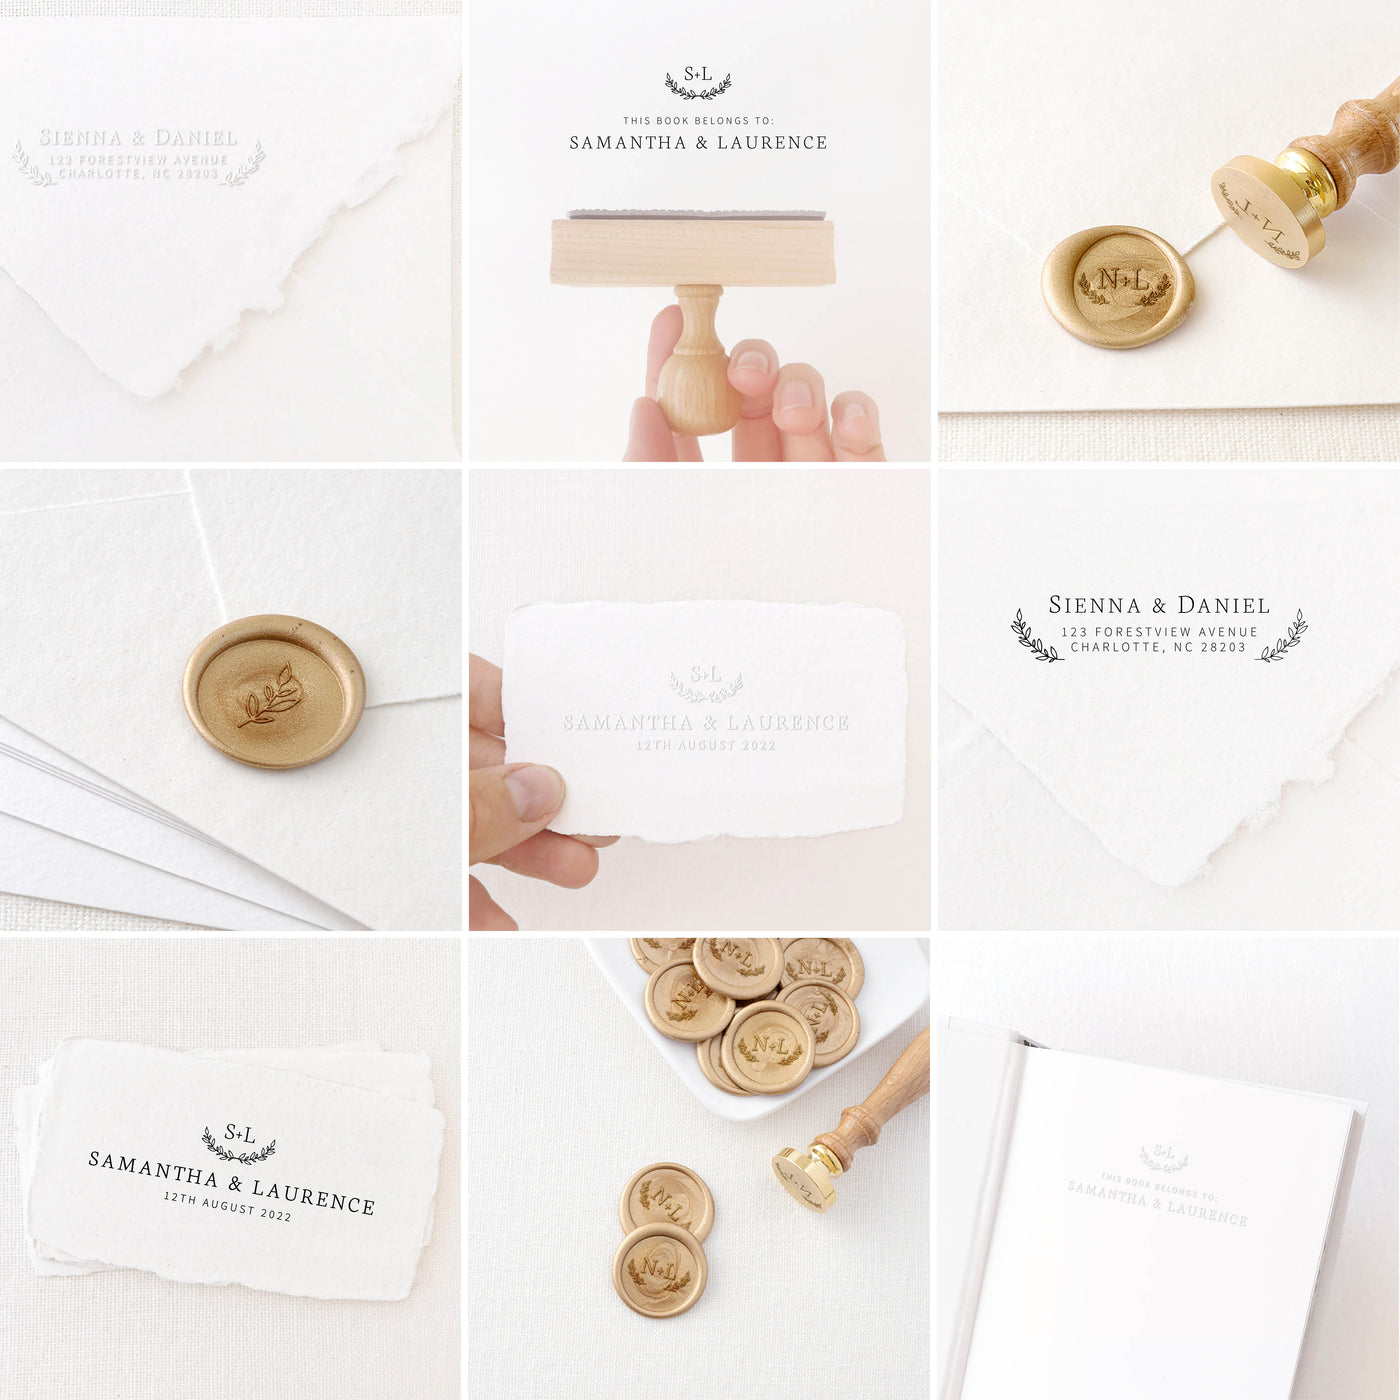 Willow Classic Botanical Return Address Rubber Stamp | Custom Rubber Stamp, Wax Seal Stickers & Embosser for Custom Luxe Embellishment Packaging & Fine Art Wedding Stationery Invitations | Heirloom Seals